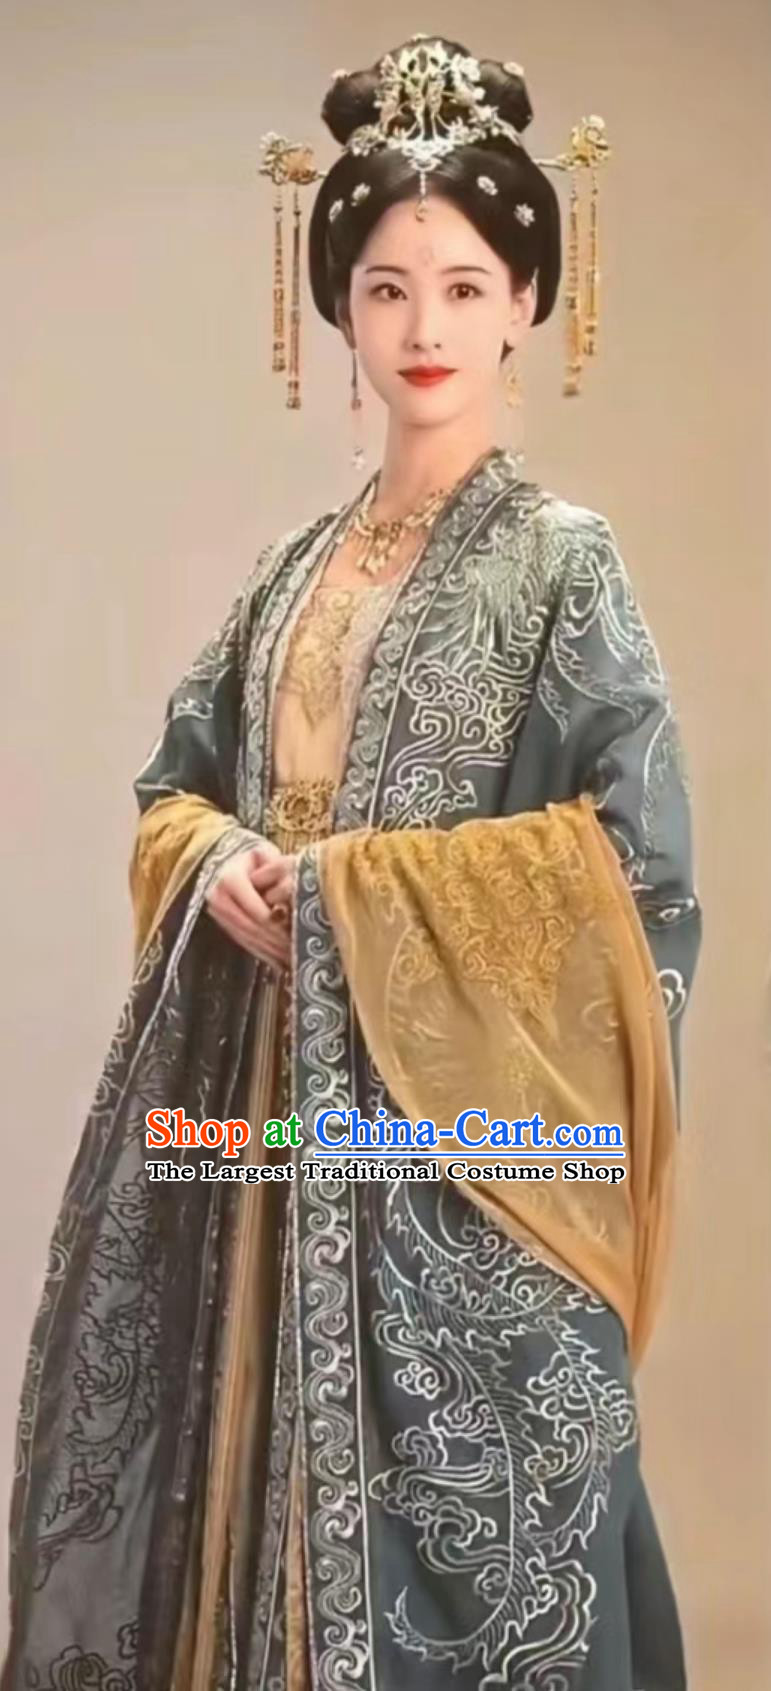 Ancient China Tang Dynasty Queen Costume 2023 Wuxia TV Series A Journey To Love Empress Xiao Yan Dress